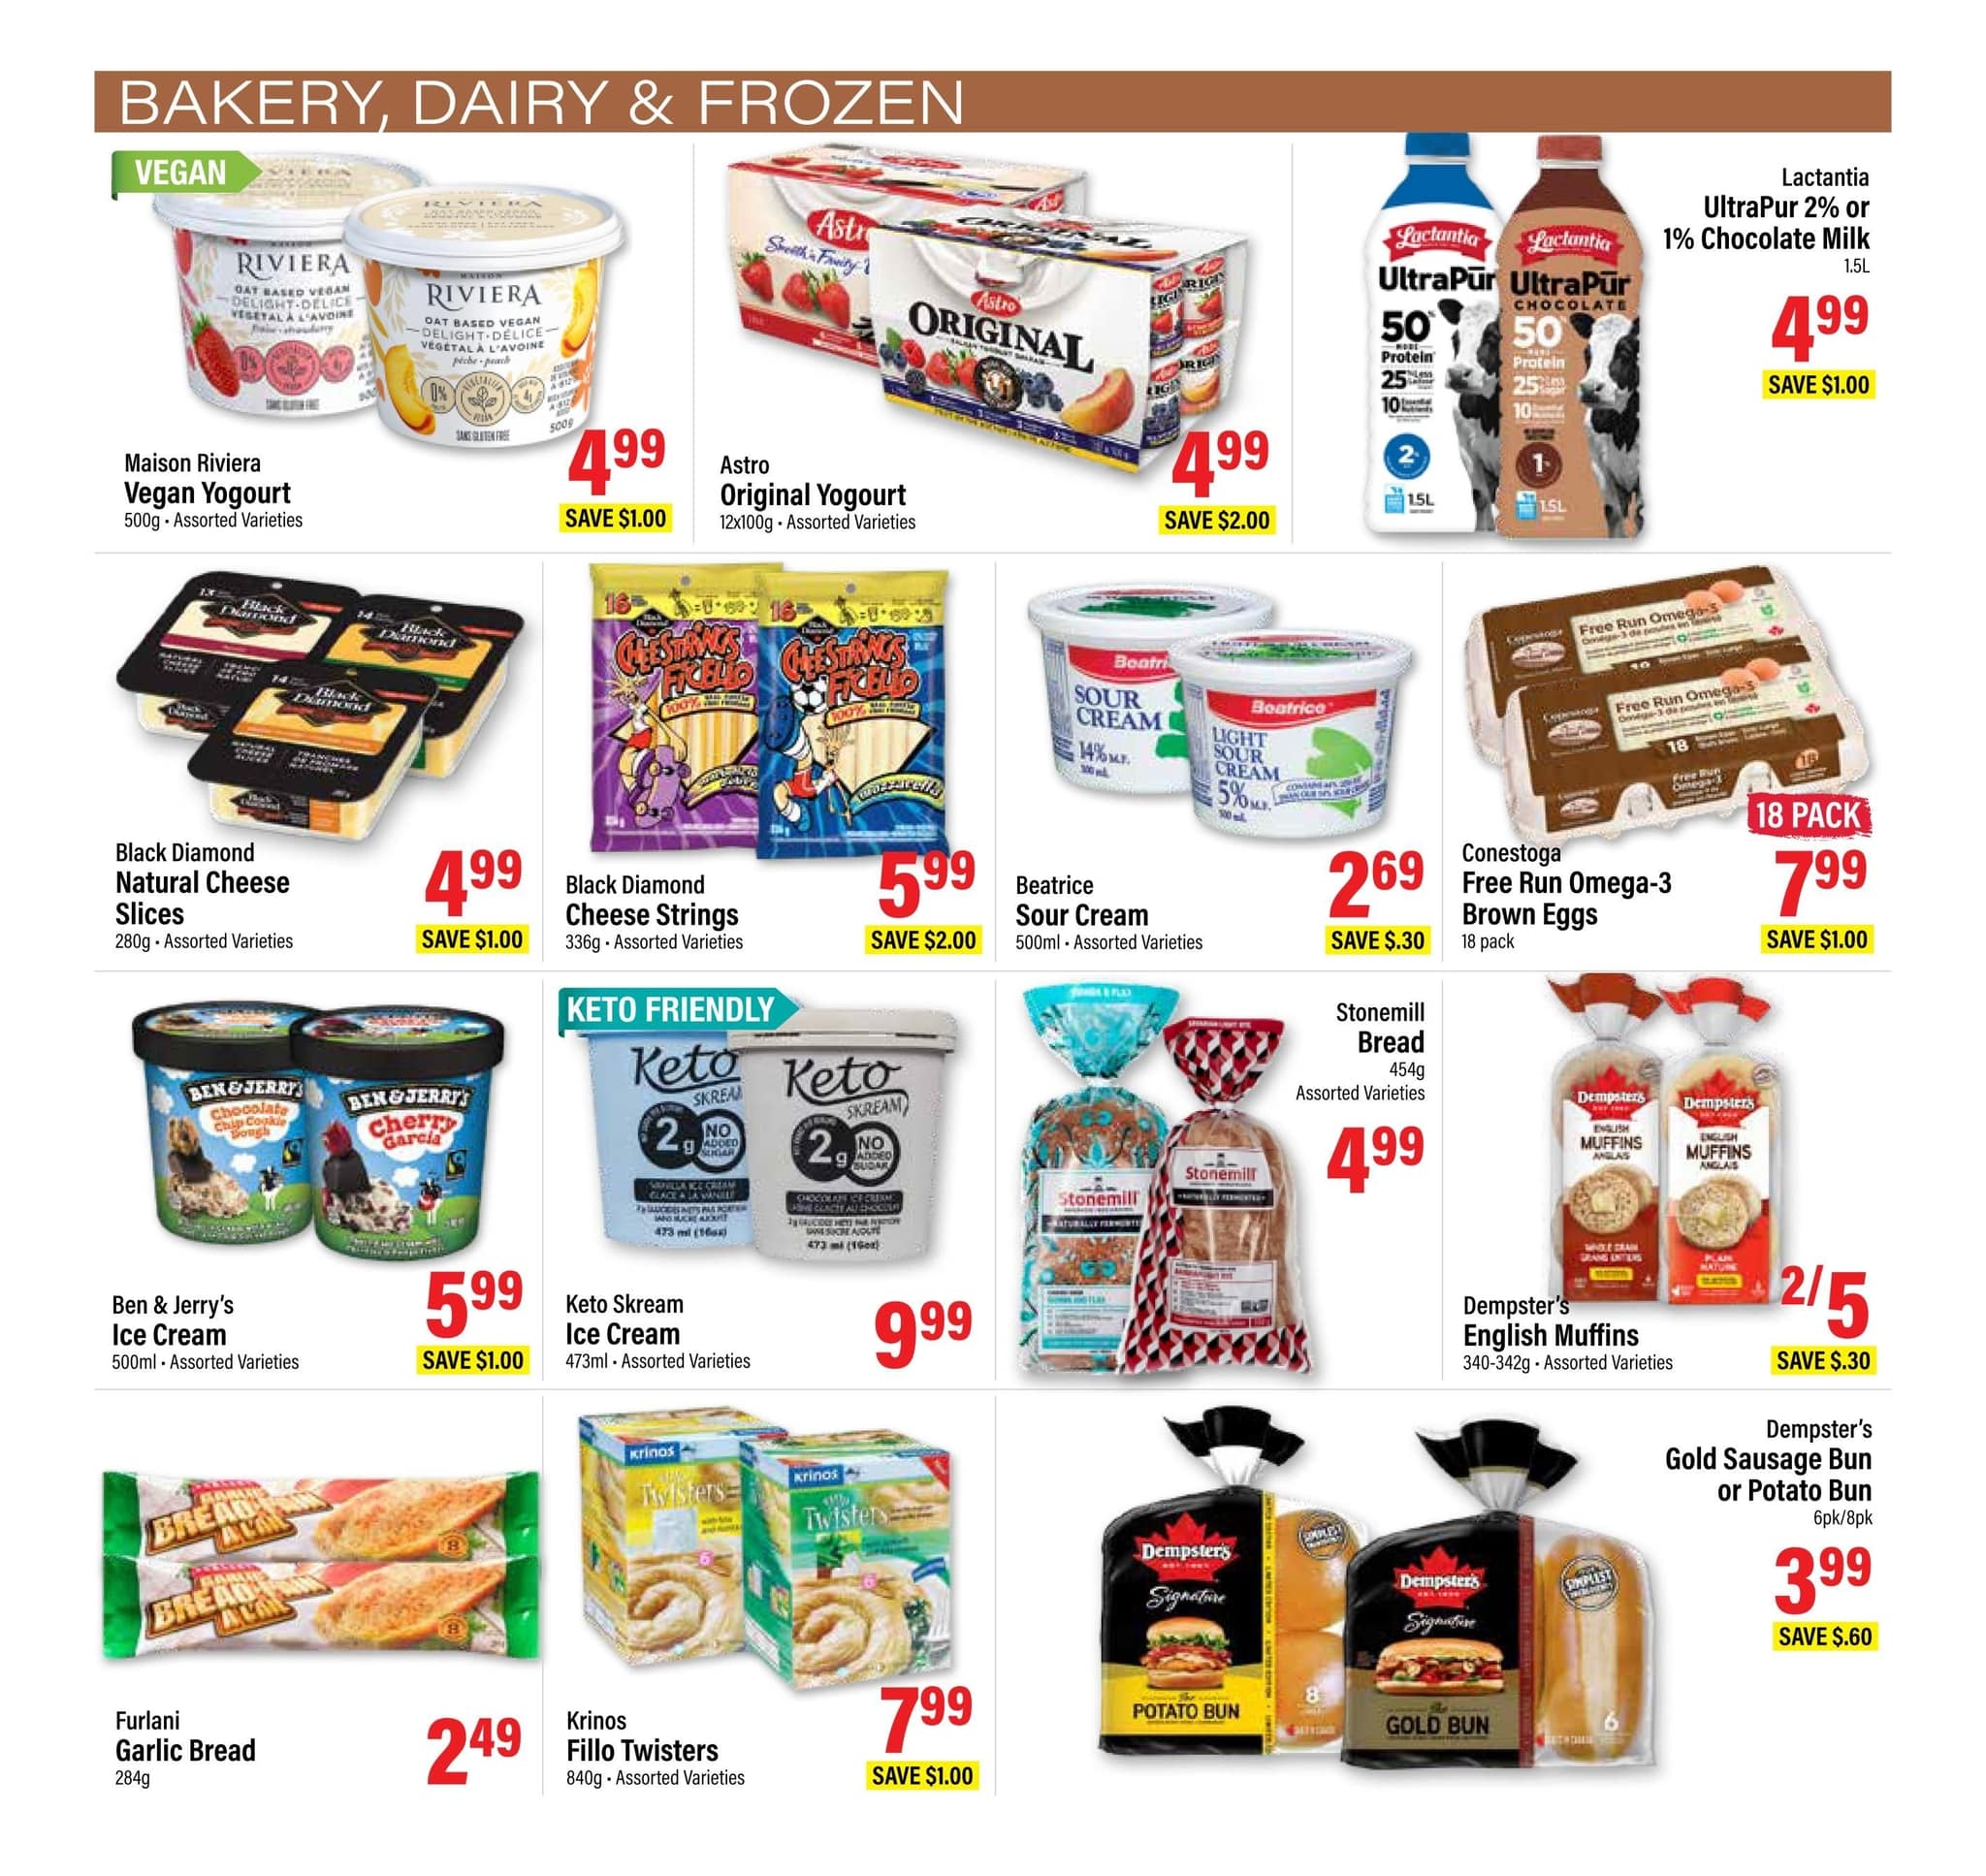 Commisso's Fresh Foods - Weekly Flyer Specials - Page 3